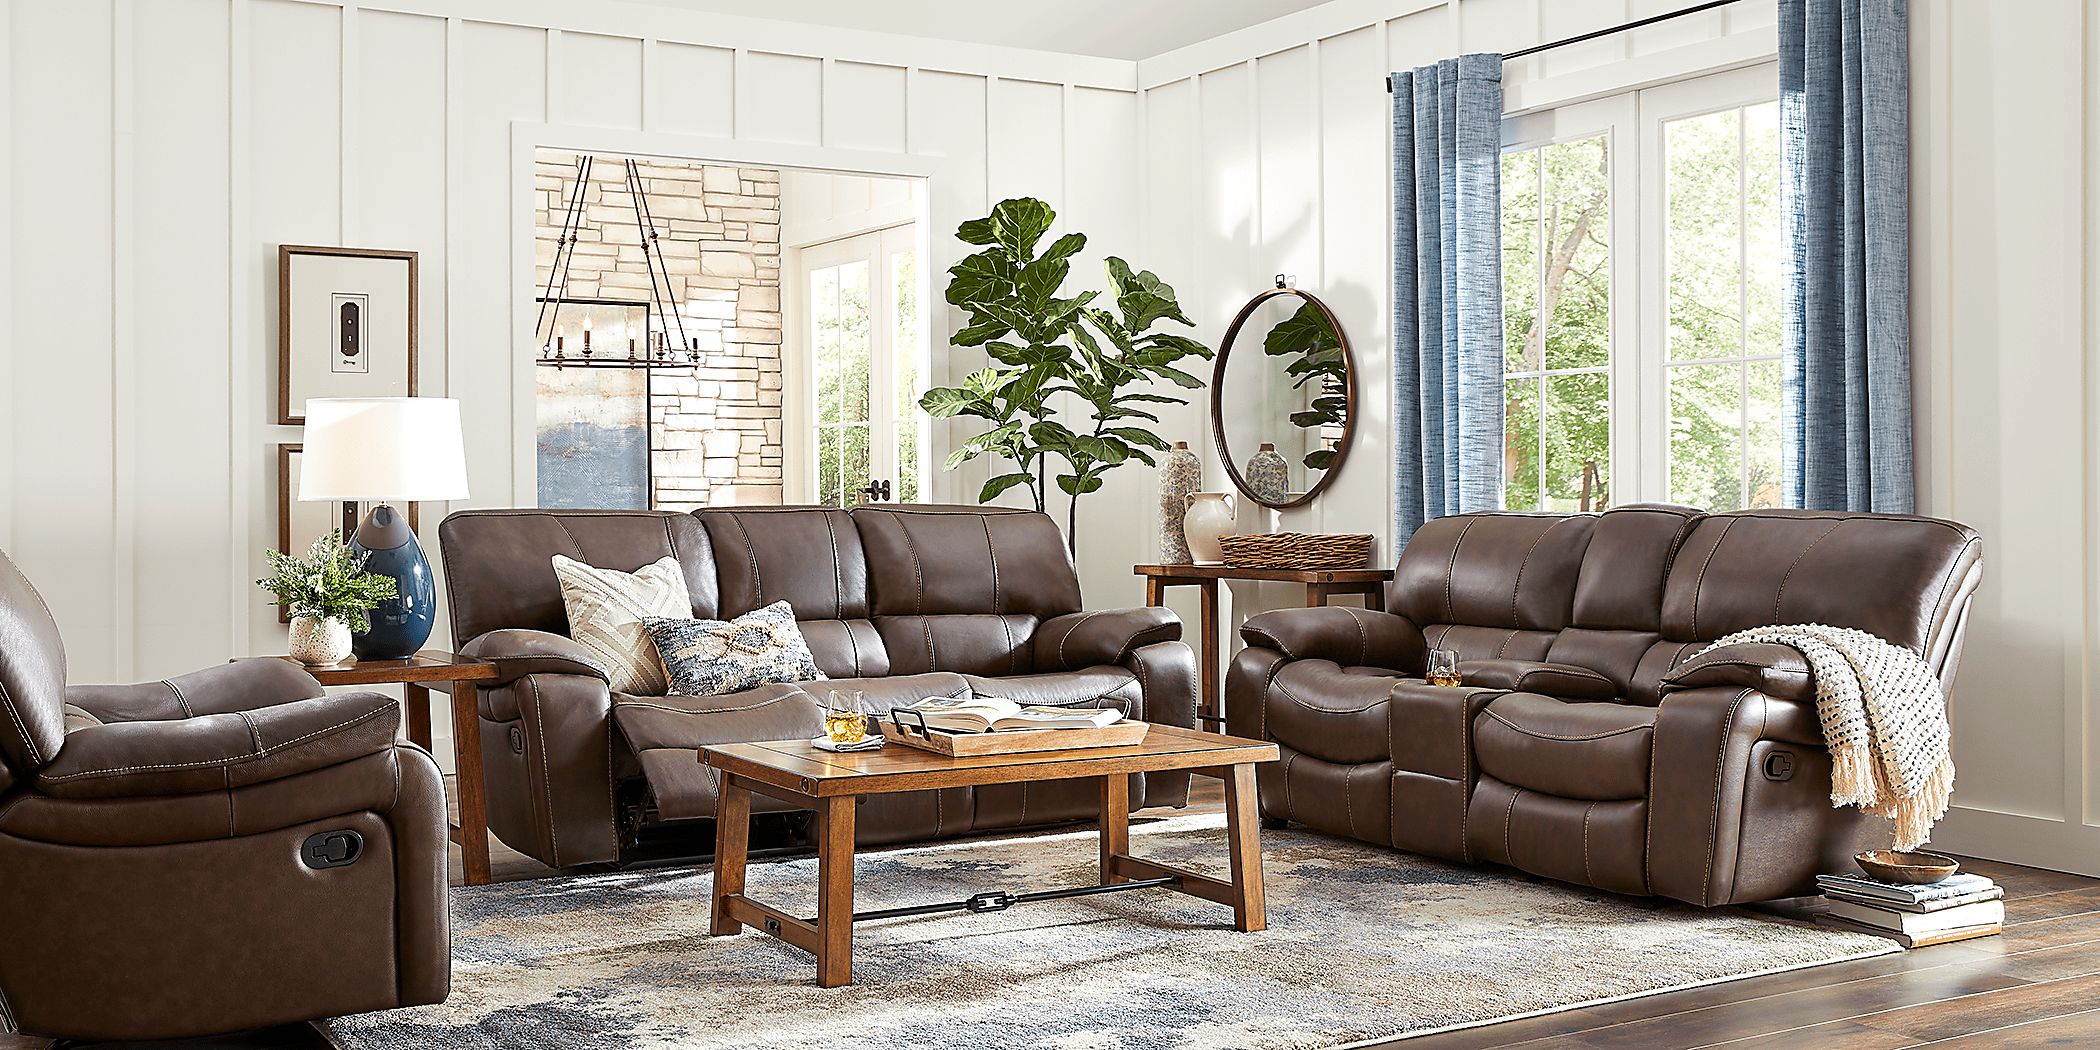 San Gabriel Brown Leather 8 Pc Reclining Living Room